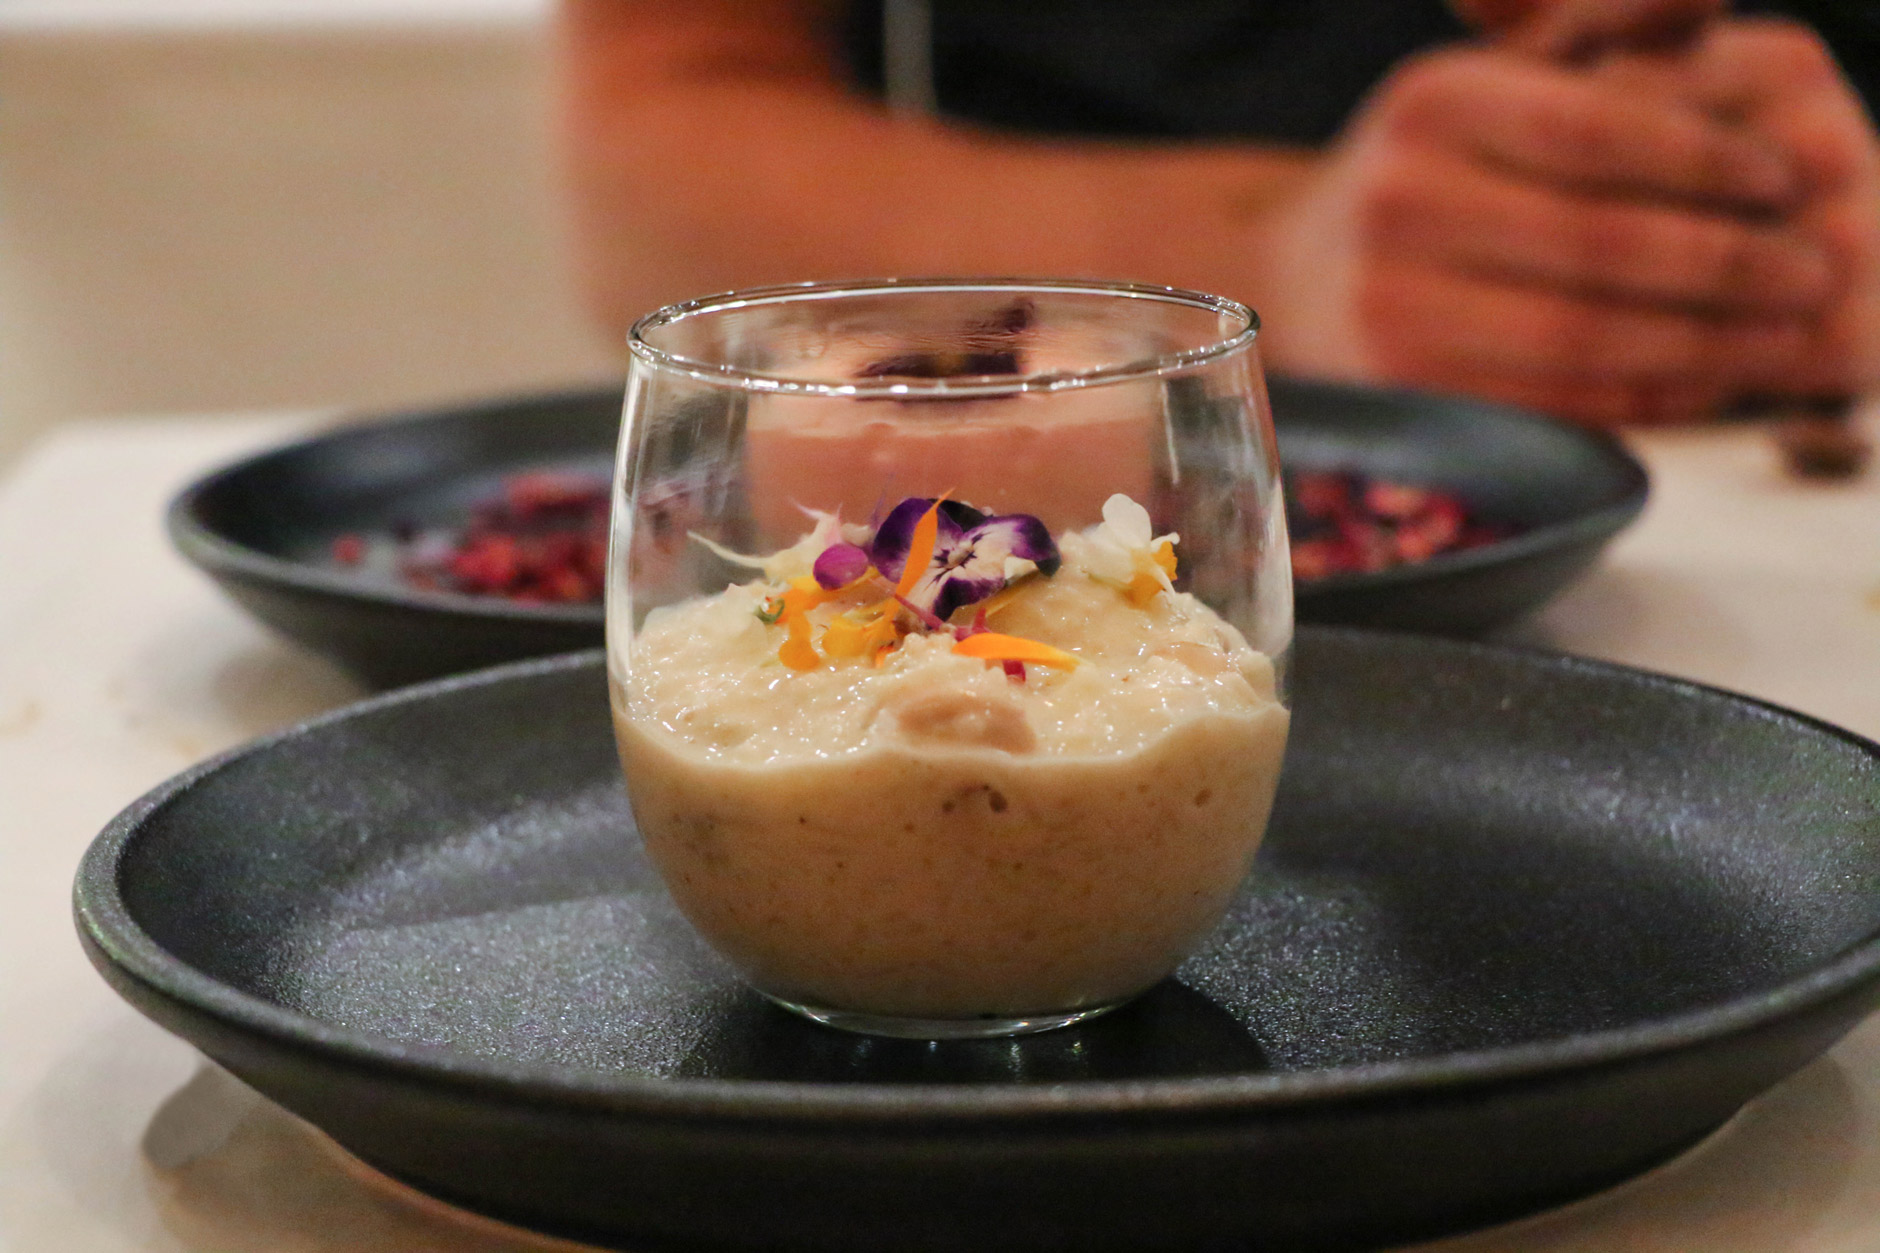 Review: Spice Theory Turramurra - Payasam